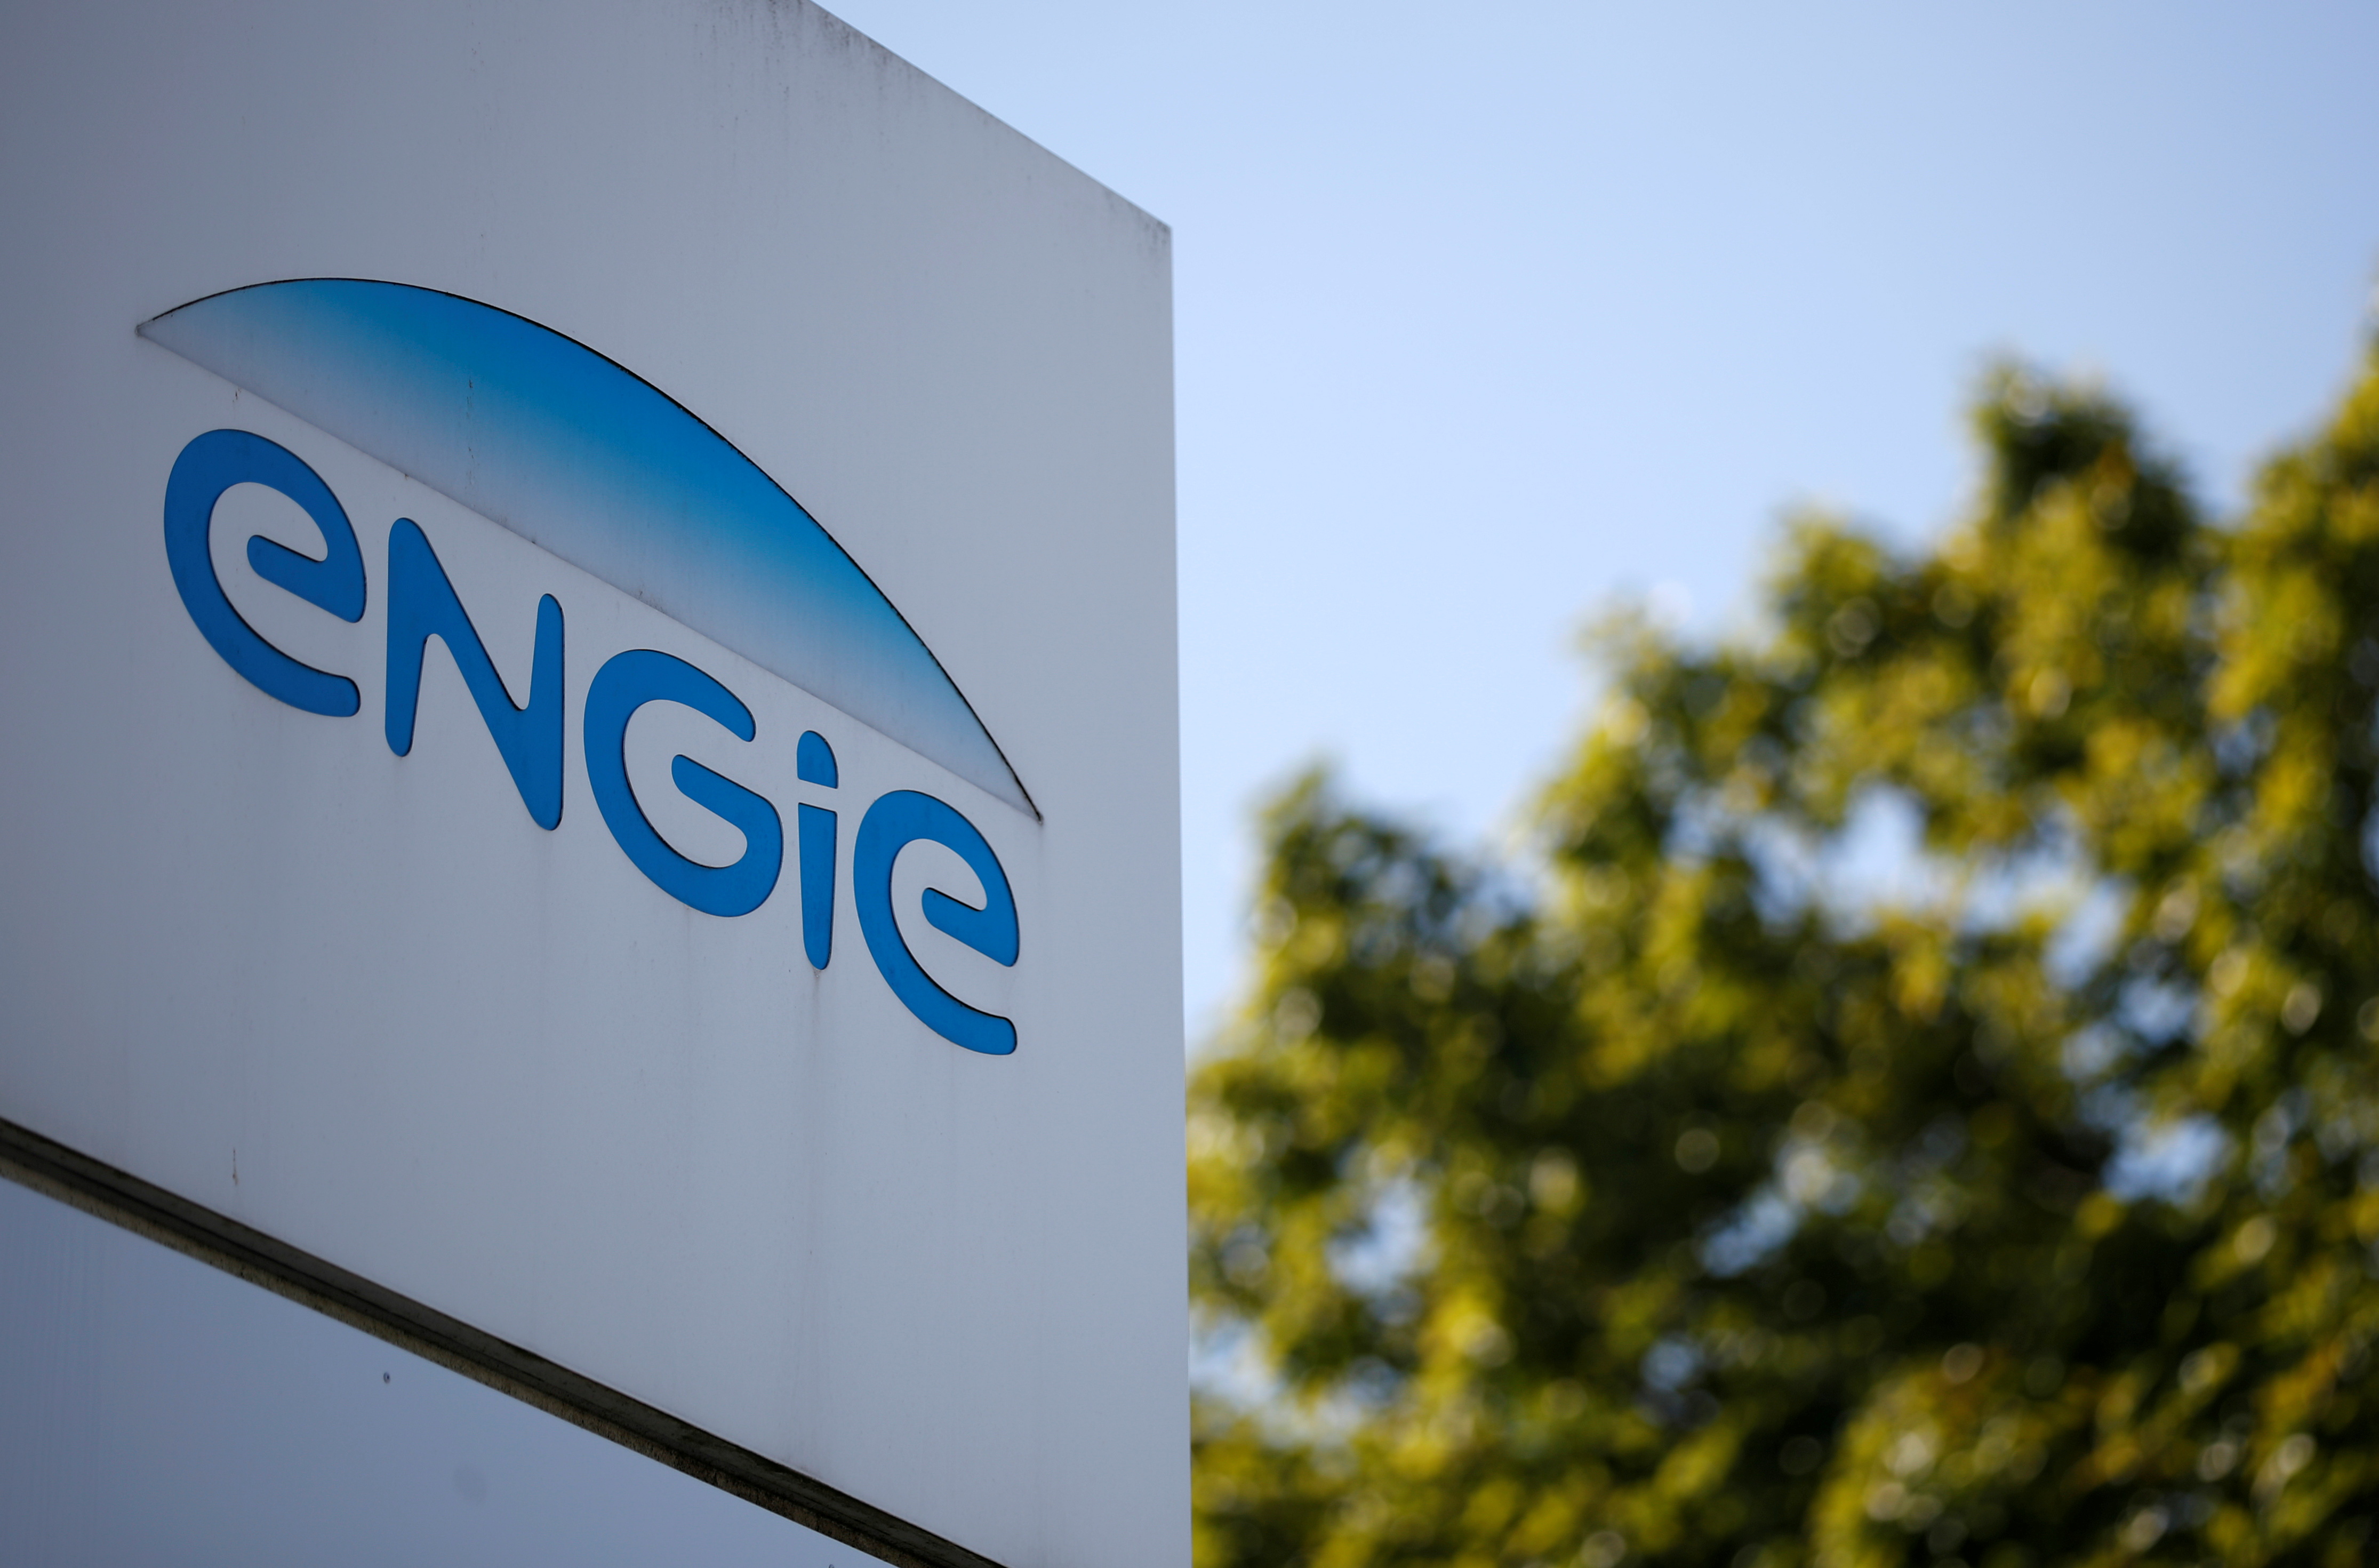 The logo of French gas and power group Engie is seen in Nantes, France, September 28, 2020. REUTERS/Stephane Mahe/File Photo